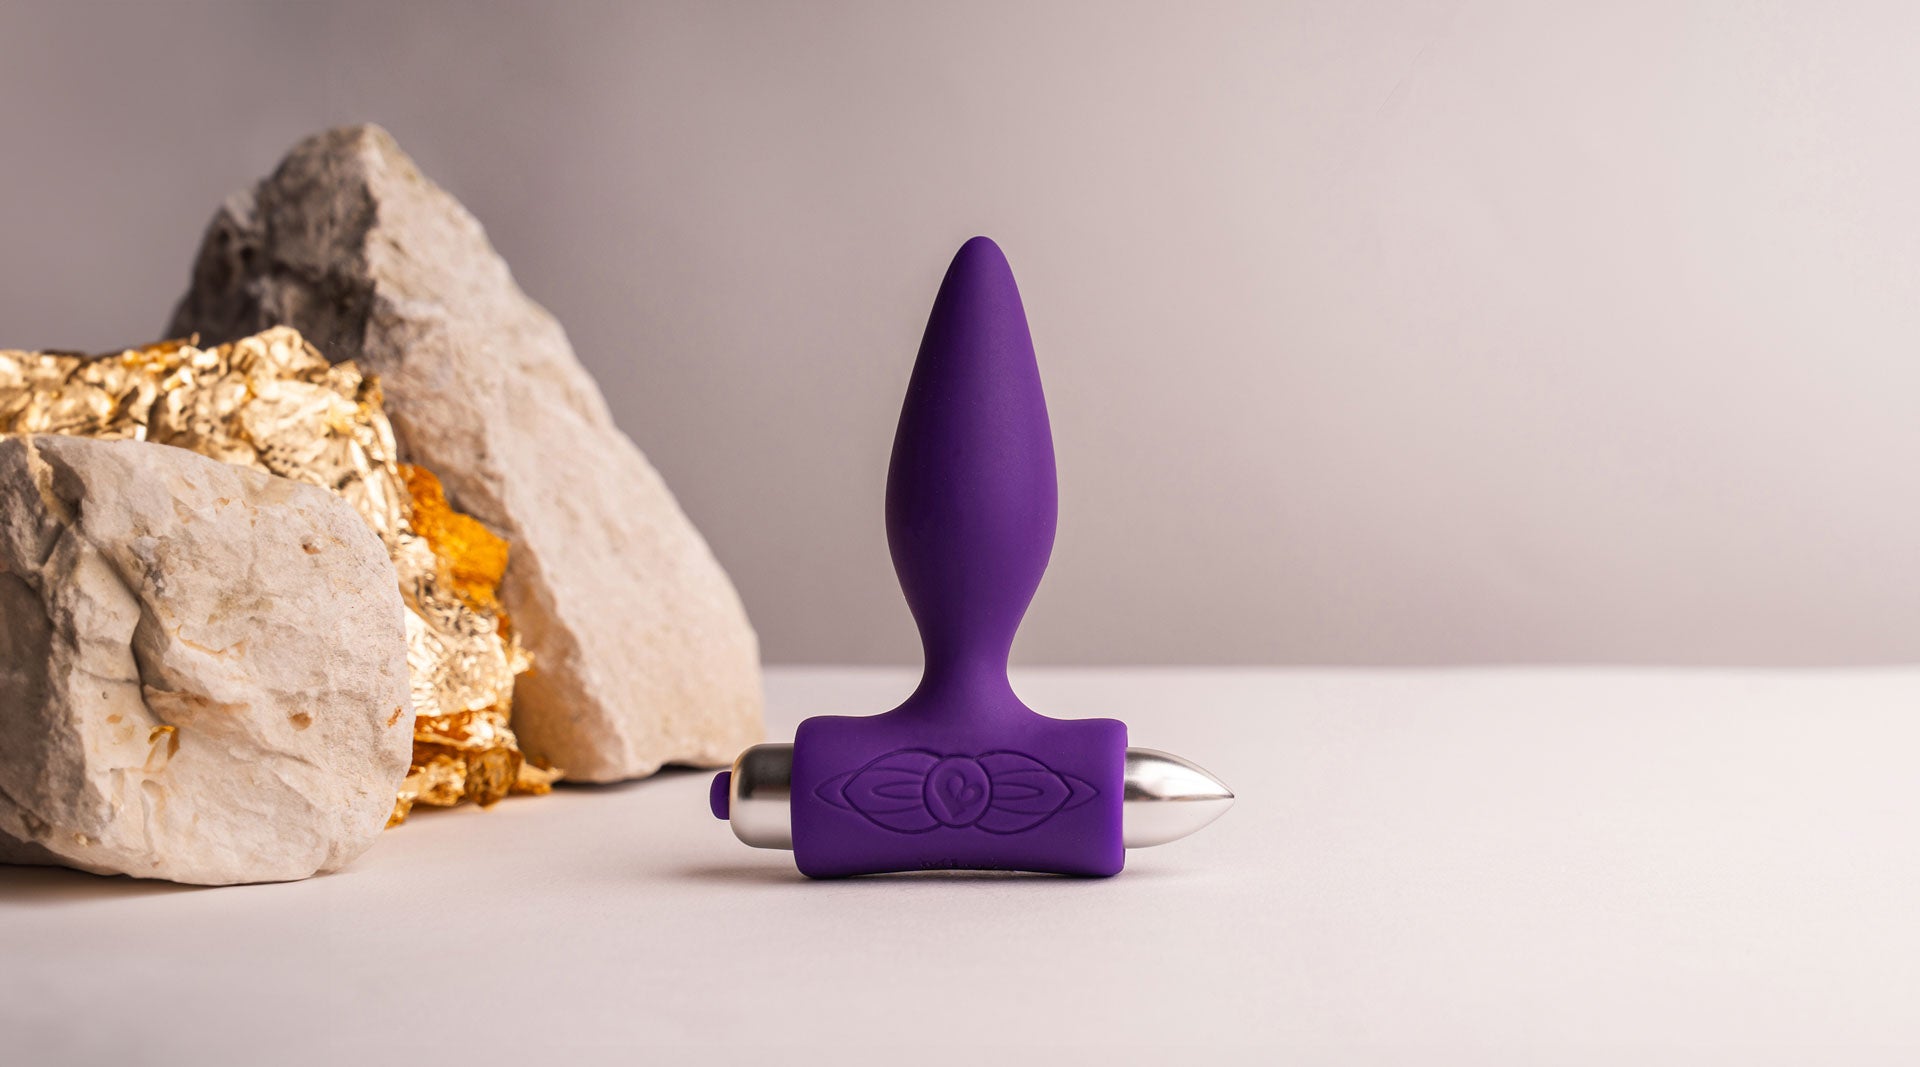 Purple silicone tapered tip butt plug housing a removable bullet vibrator.